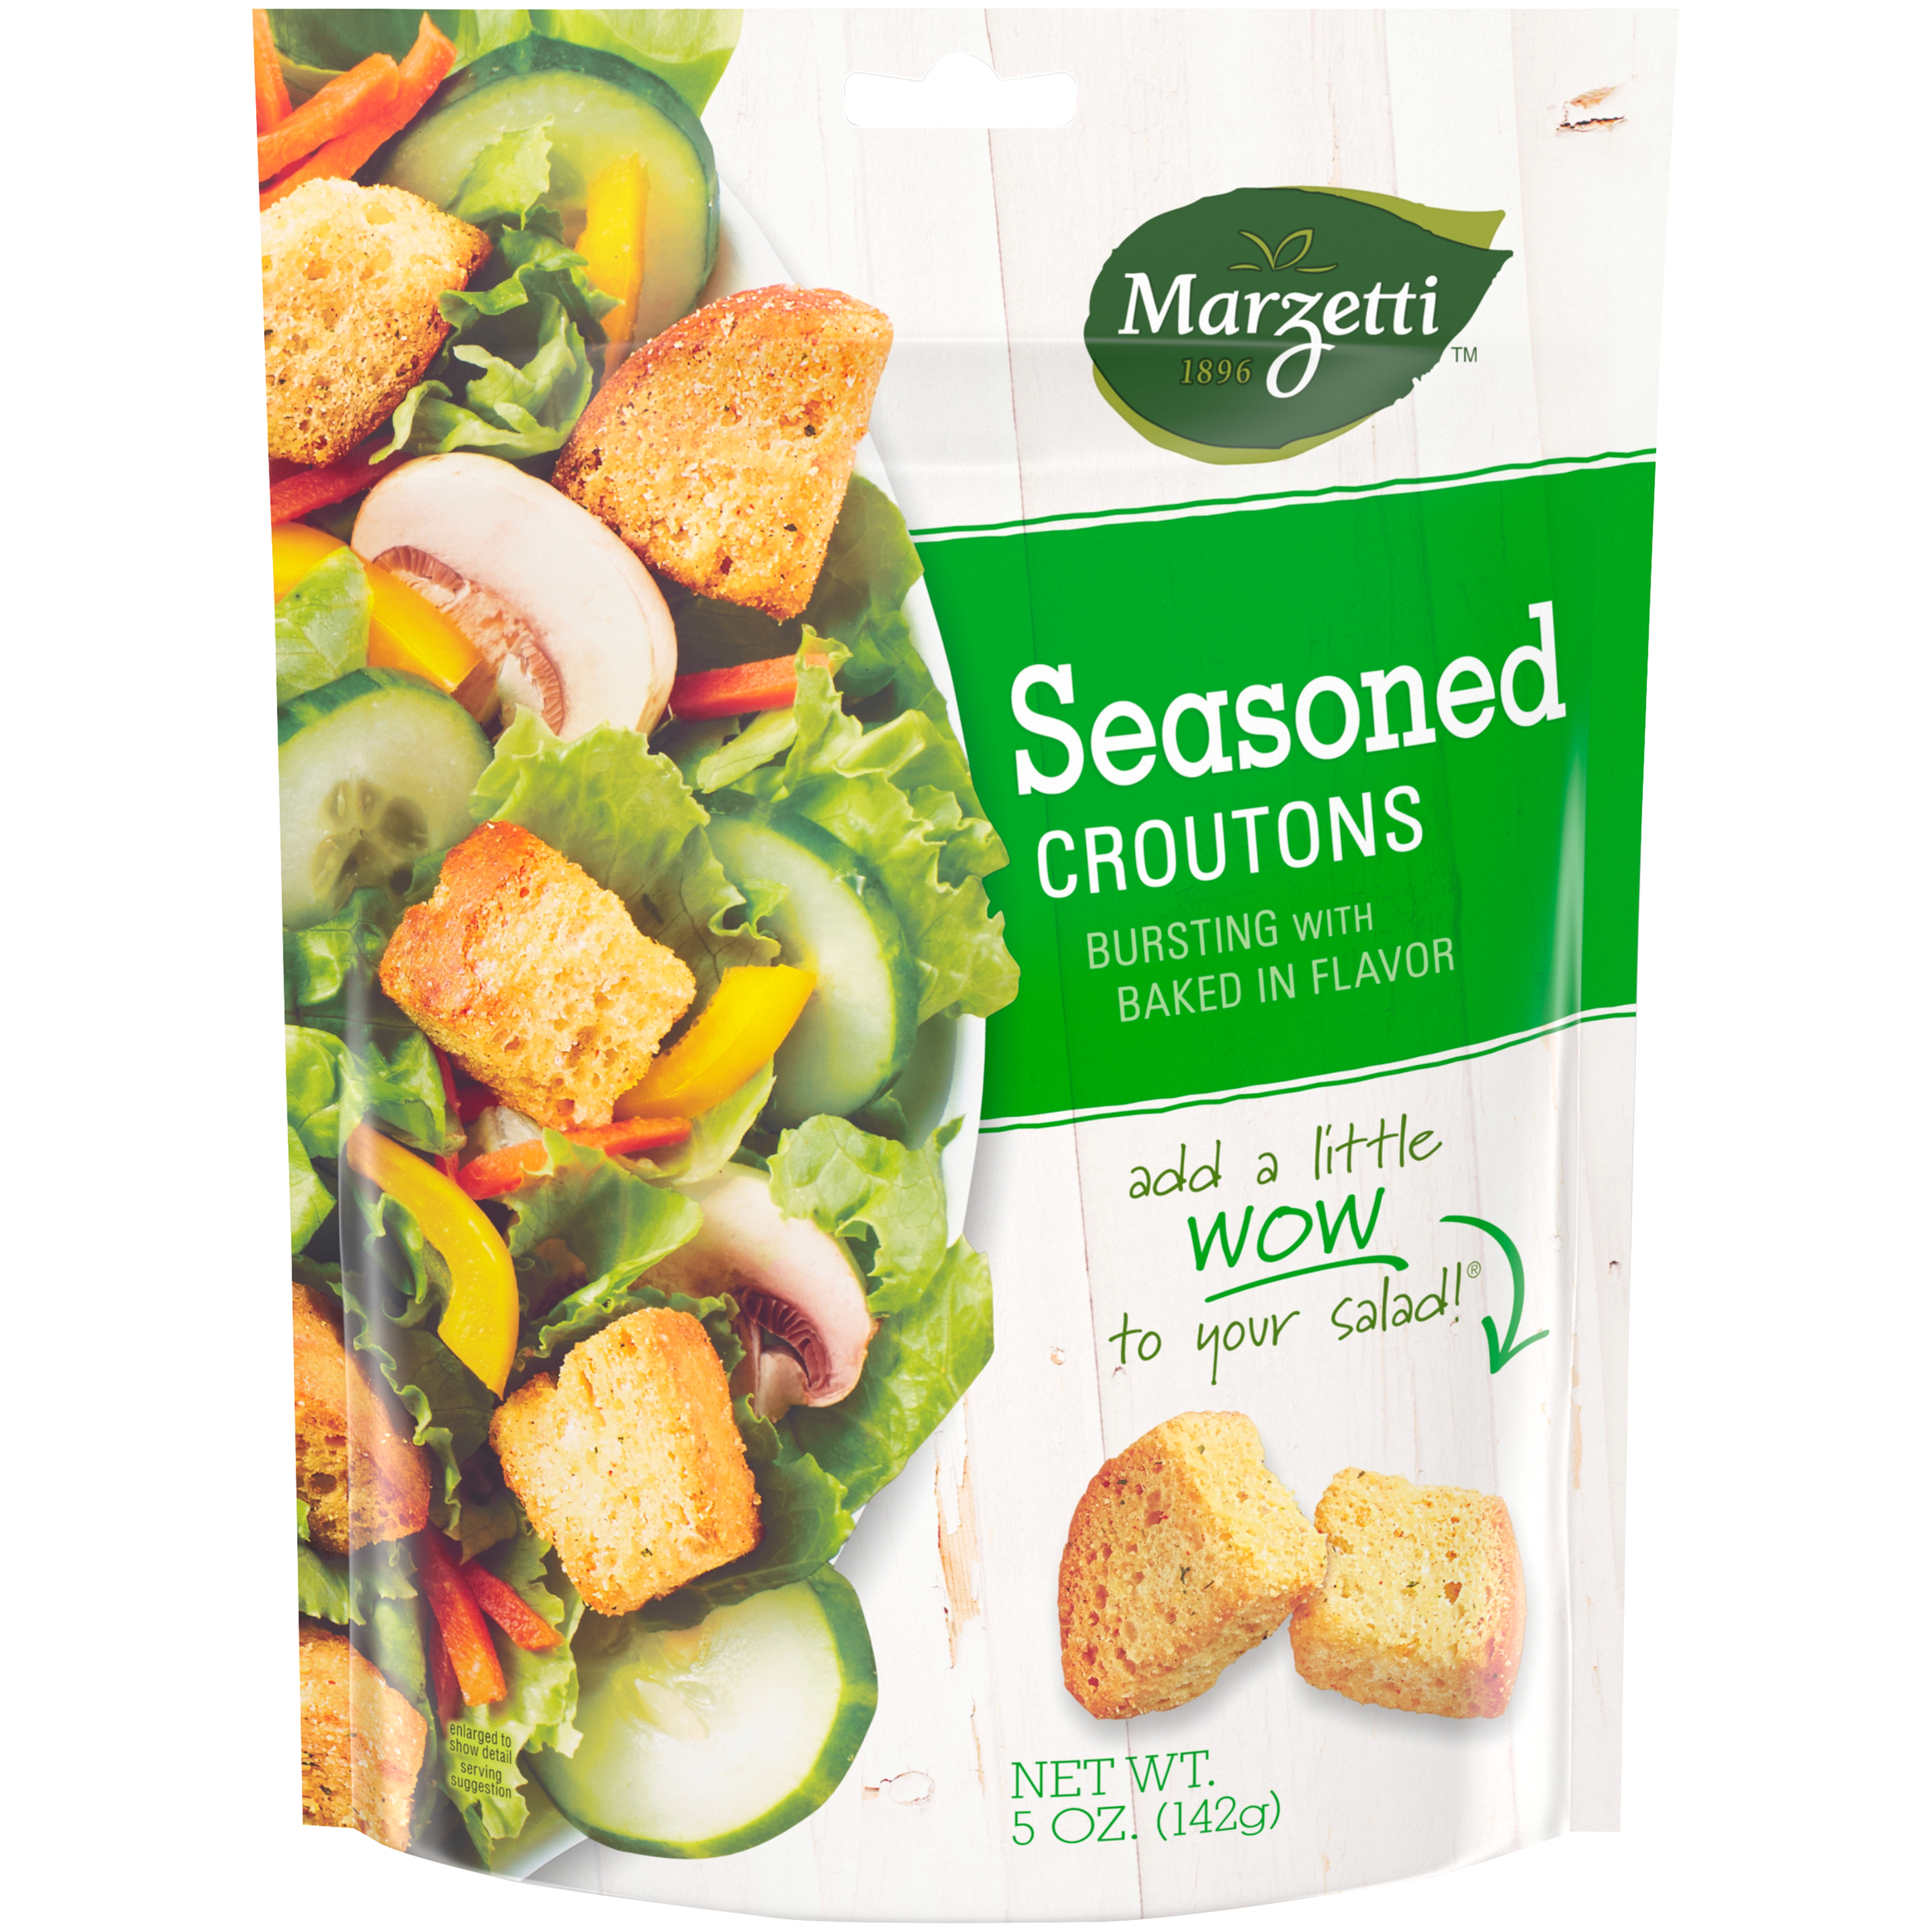 Marzetti Seasoned Croutons, 5 oz. Bag; Toppings for Salads & Soups - image 1 of 7